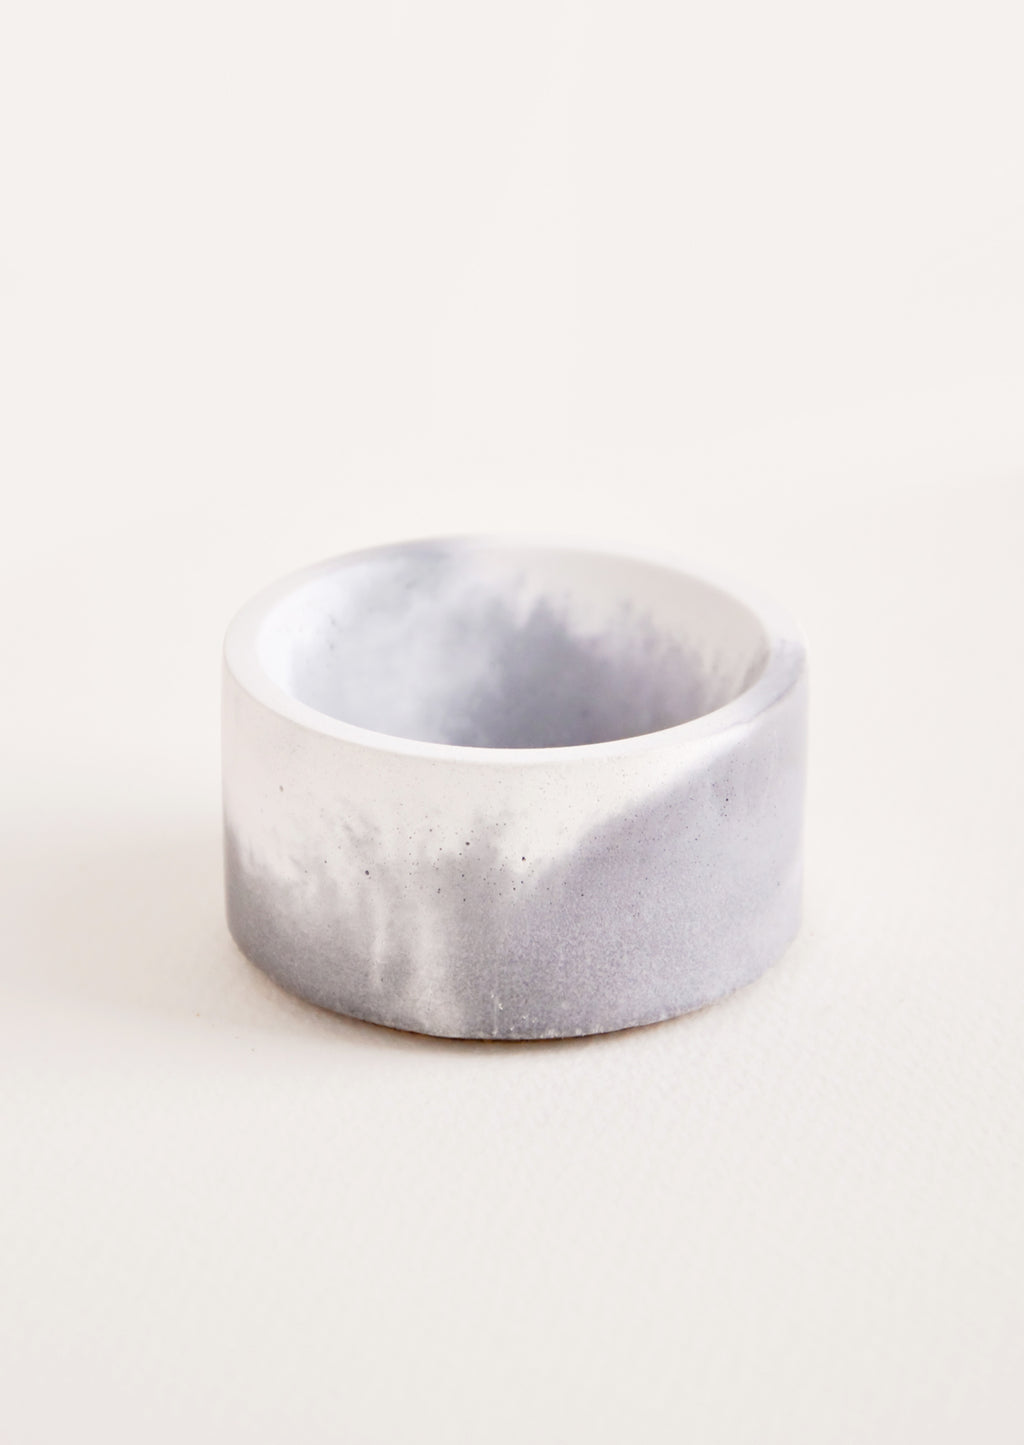 Grey / White: Marbled Incense Holder in Grey / White - LEIF